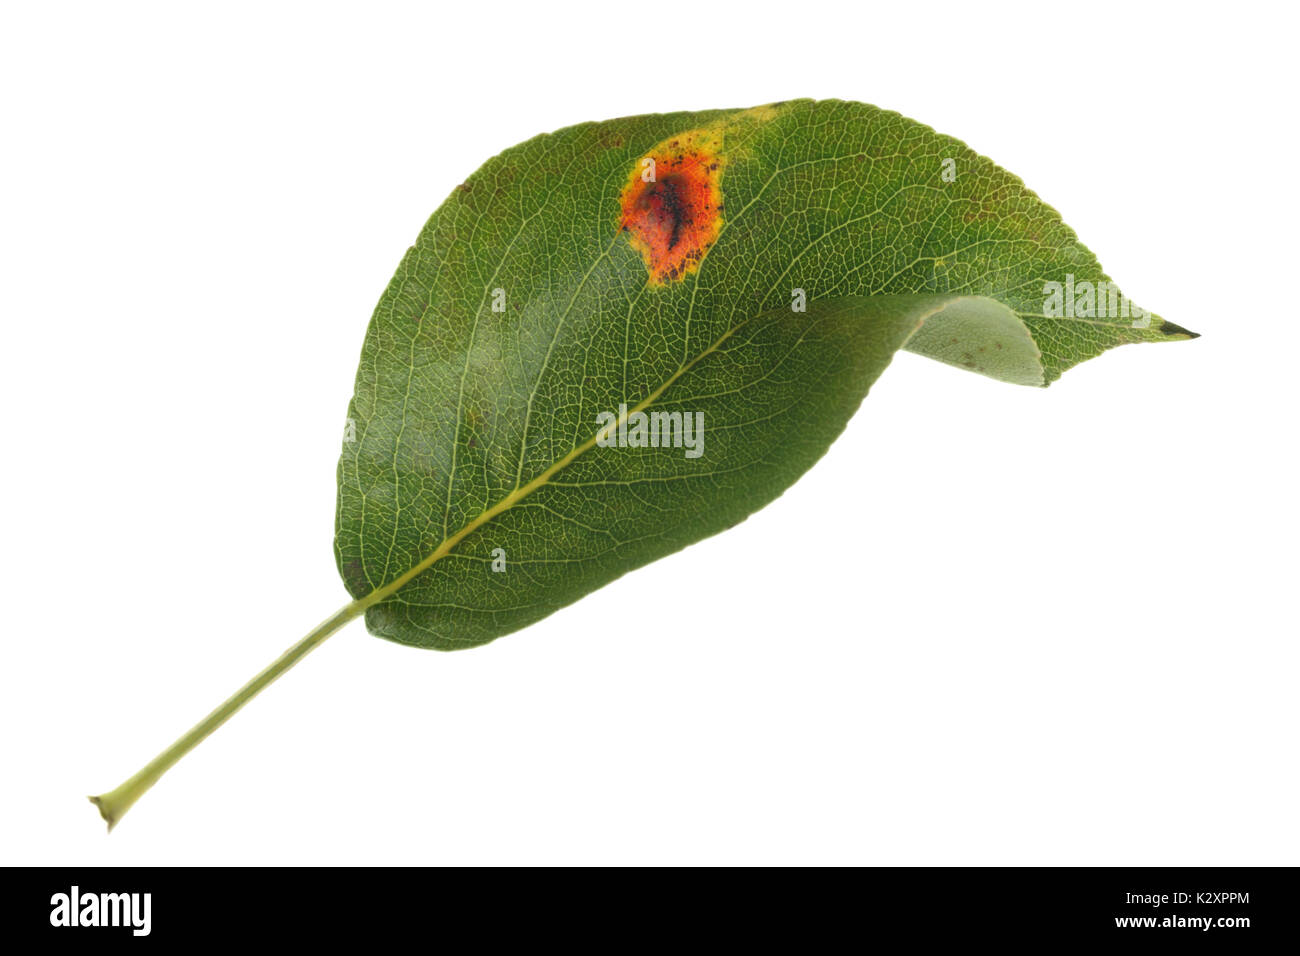 Pear leaf showing fungal pear rust infection, isolated on a white background. Stock Photo